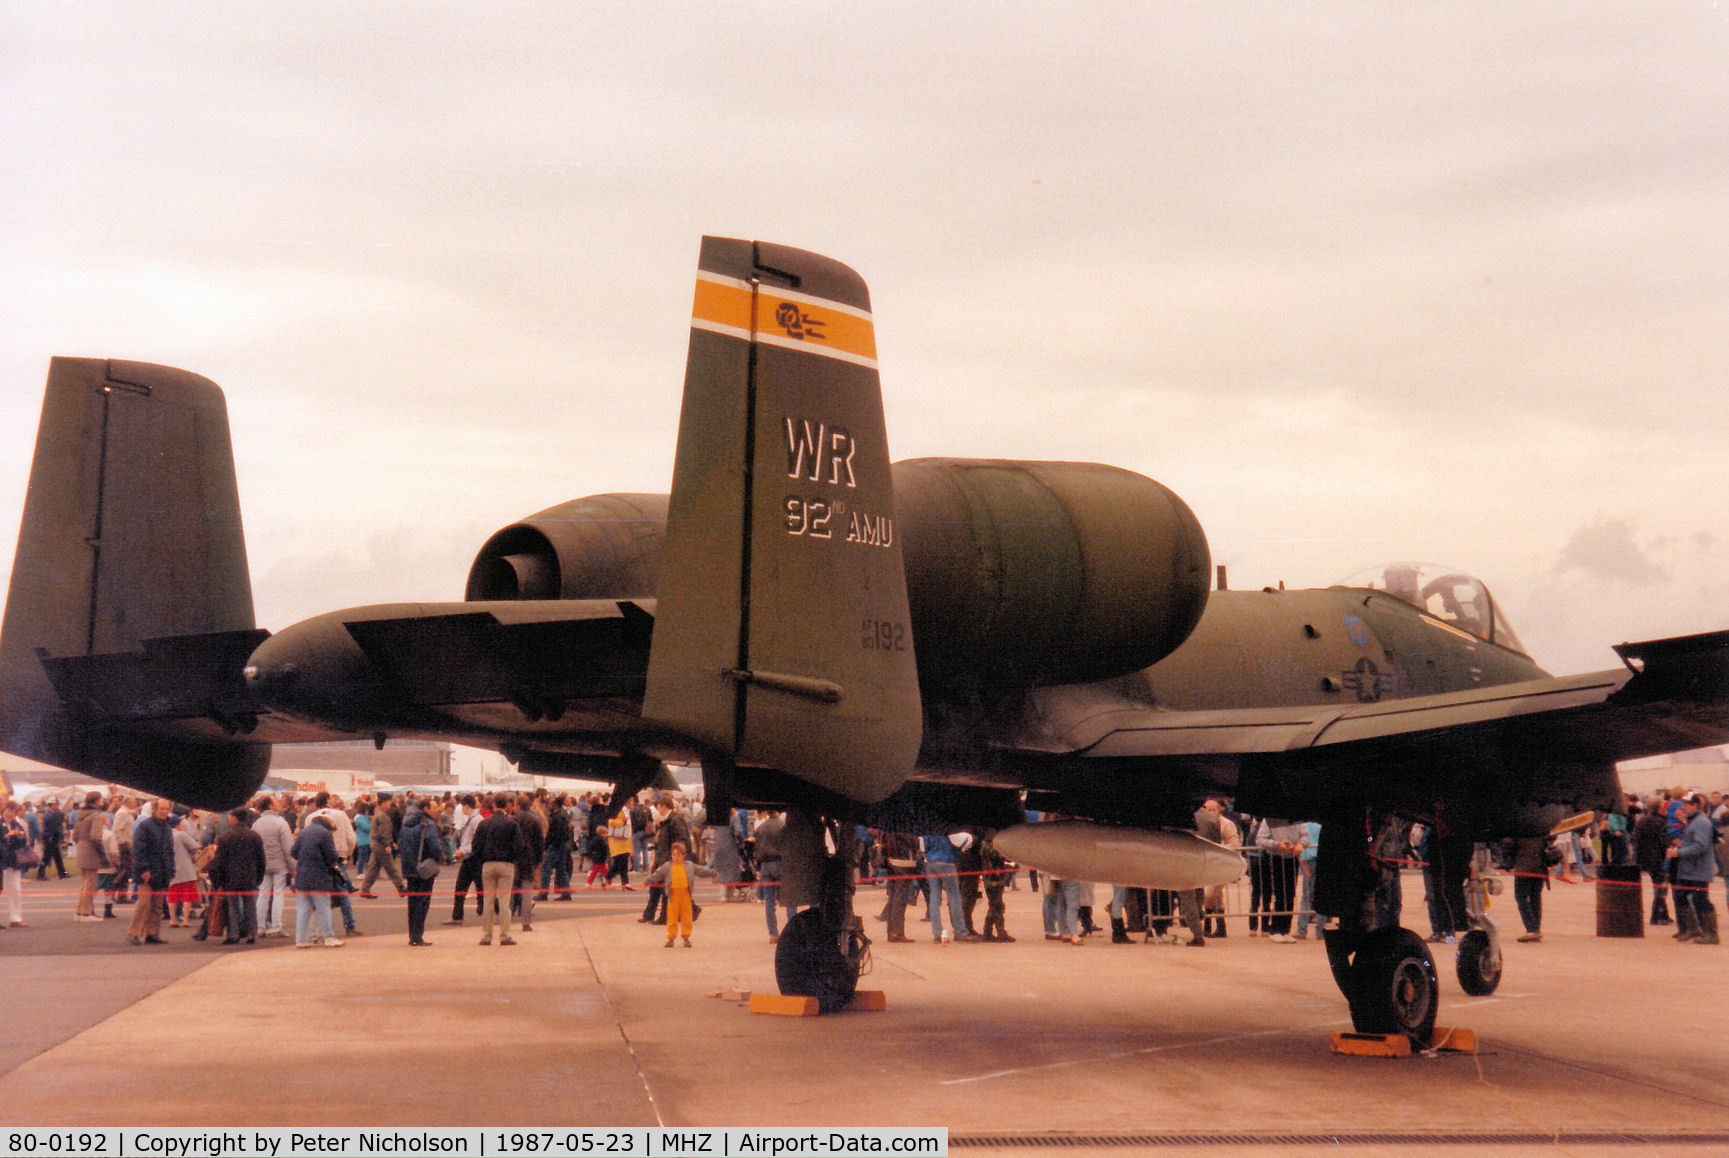 80-0192, 1980 Fairchild Republic A-10A Thunderbolt II C/N A10-0542, A-10A Thunderbolt II of 92nd Tactical Fighter Squadron/81st Tactical Fighter Wing on display at the 1987 RAF Mildenhall Air Fete.